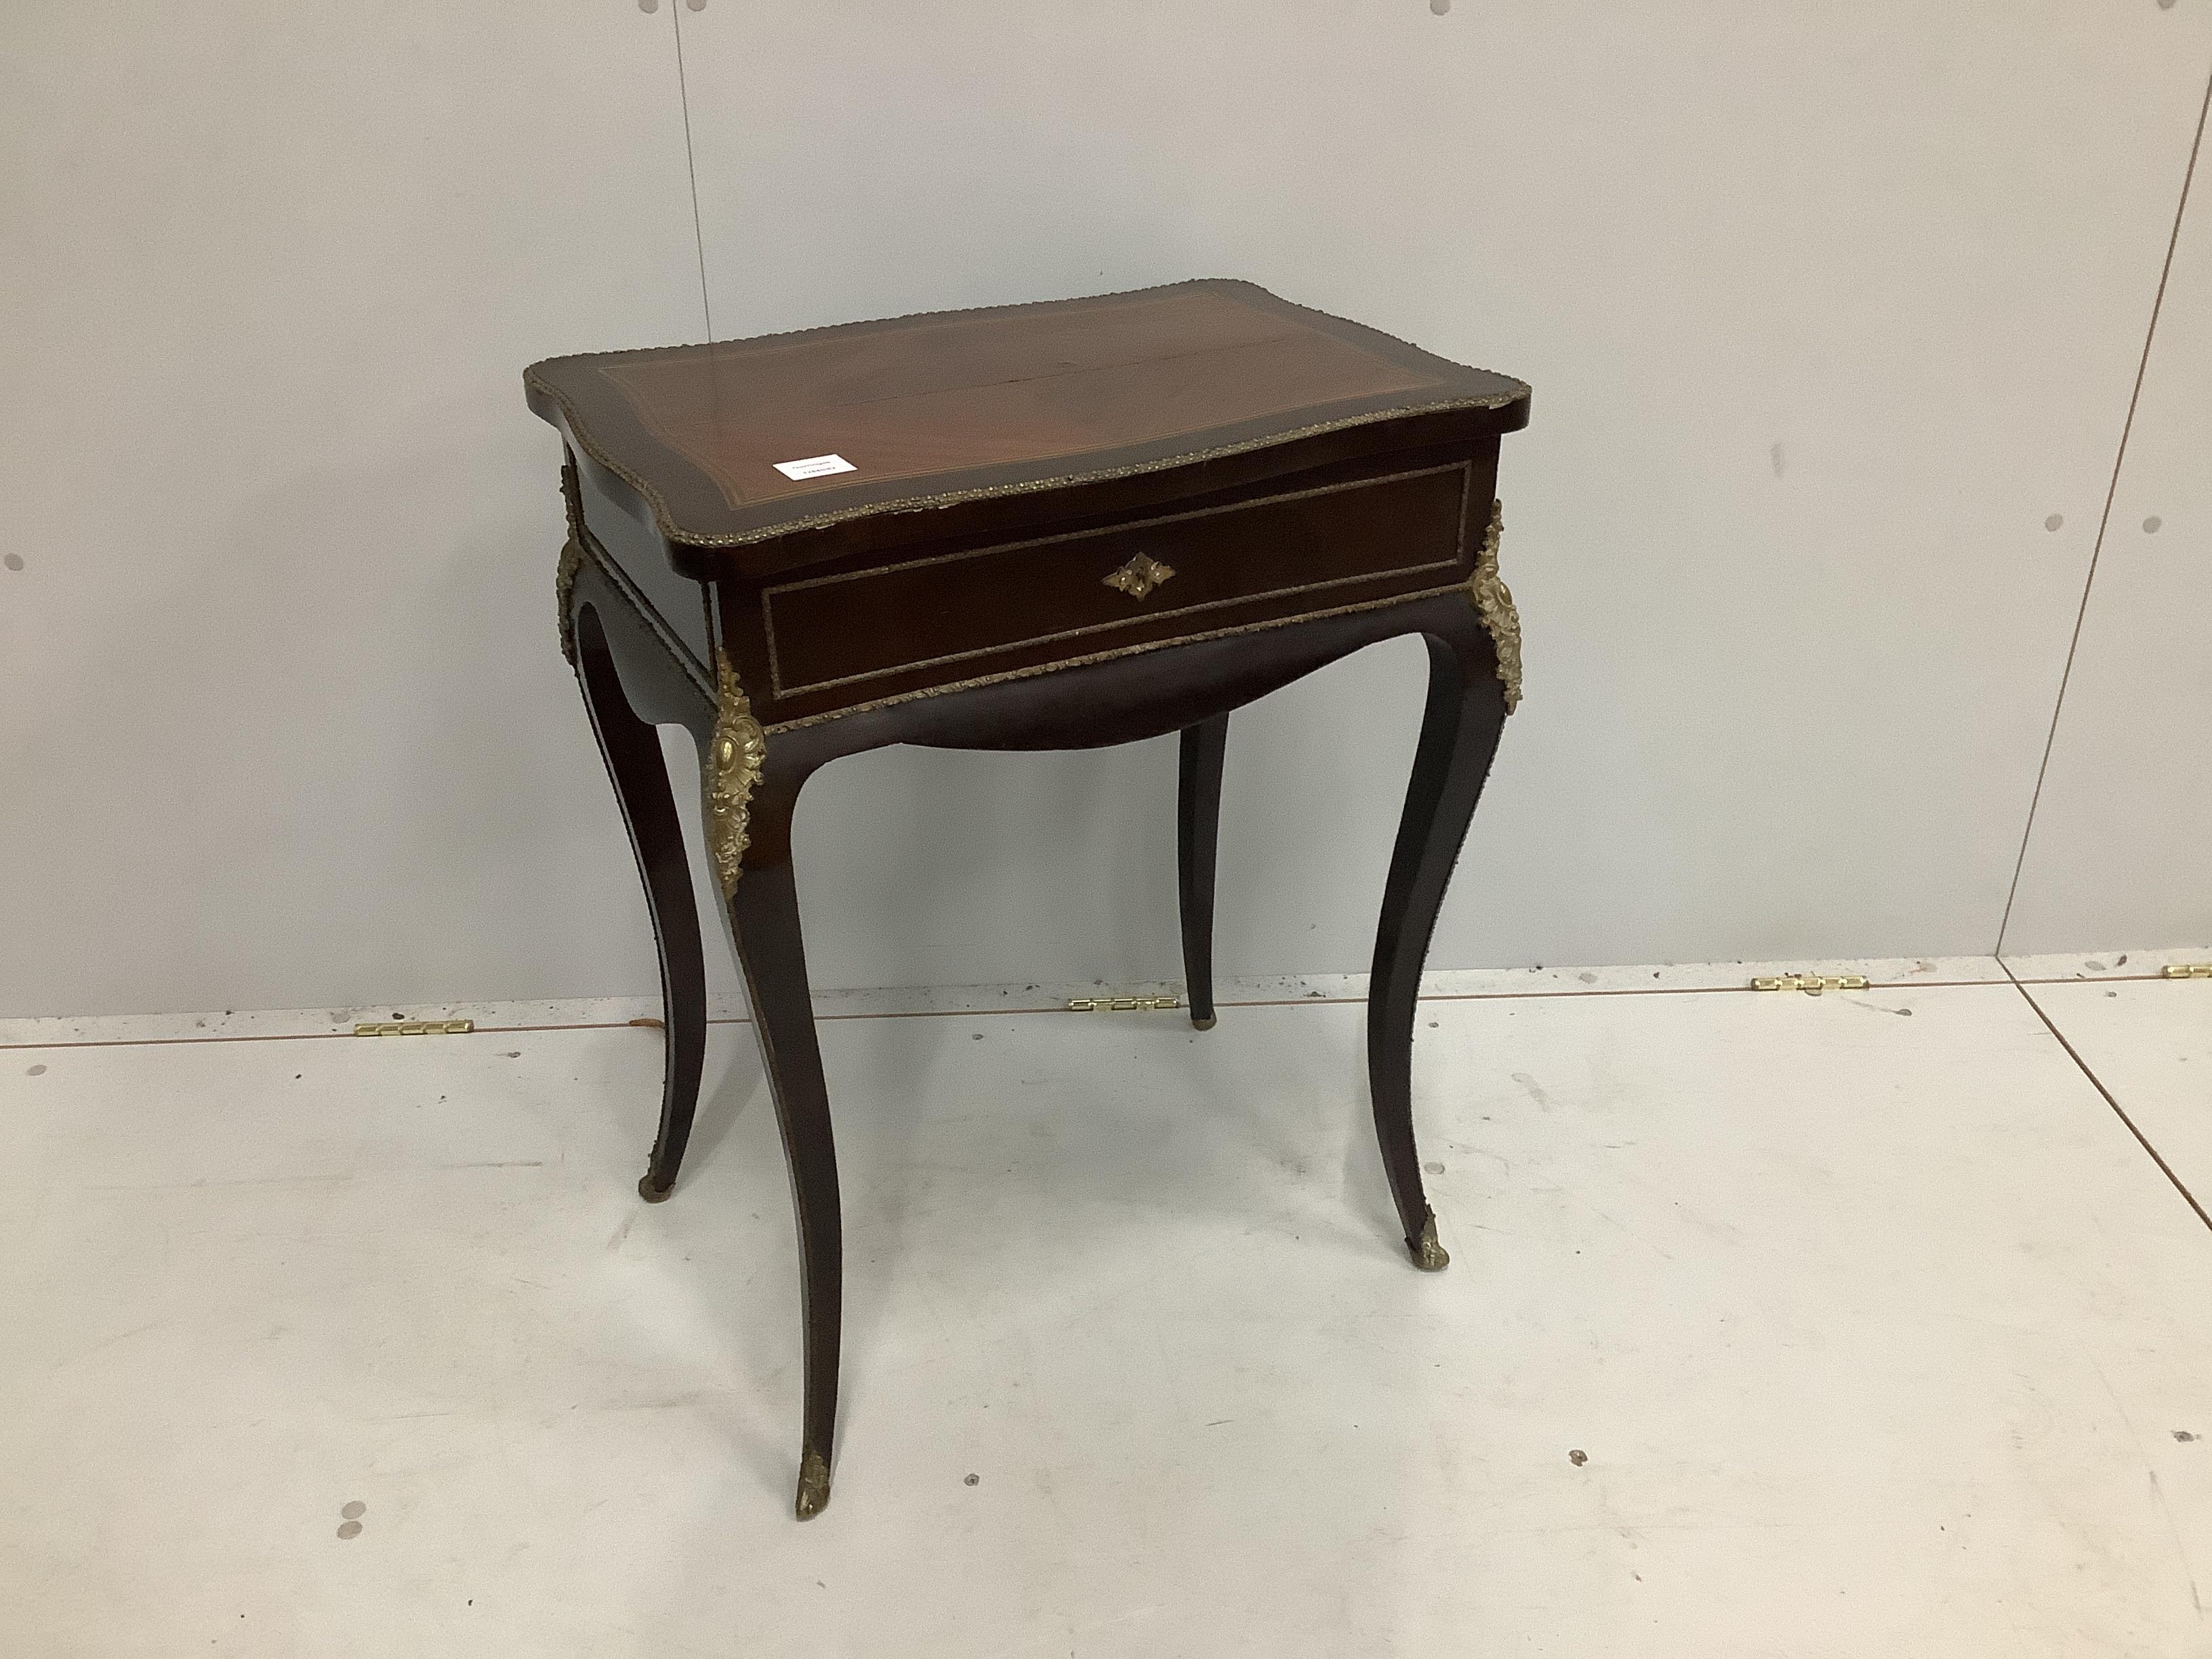 A 19th century French gilt metal mounted and brass inlaid enclosed dressing table, width 57cm, depth 41cm, height 72cm